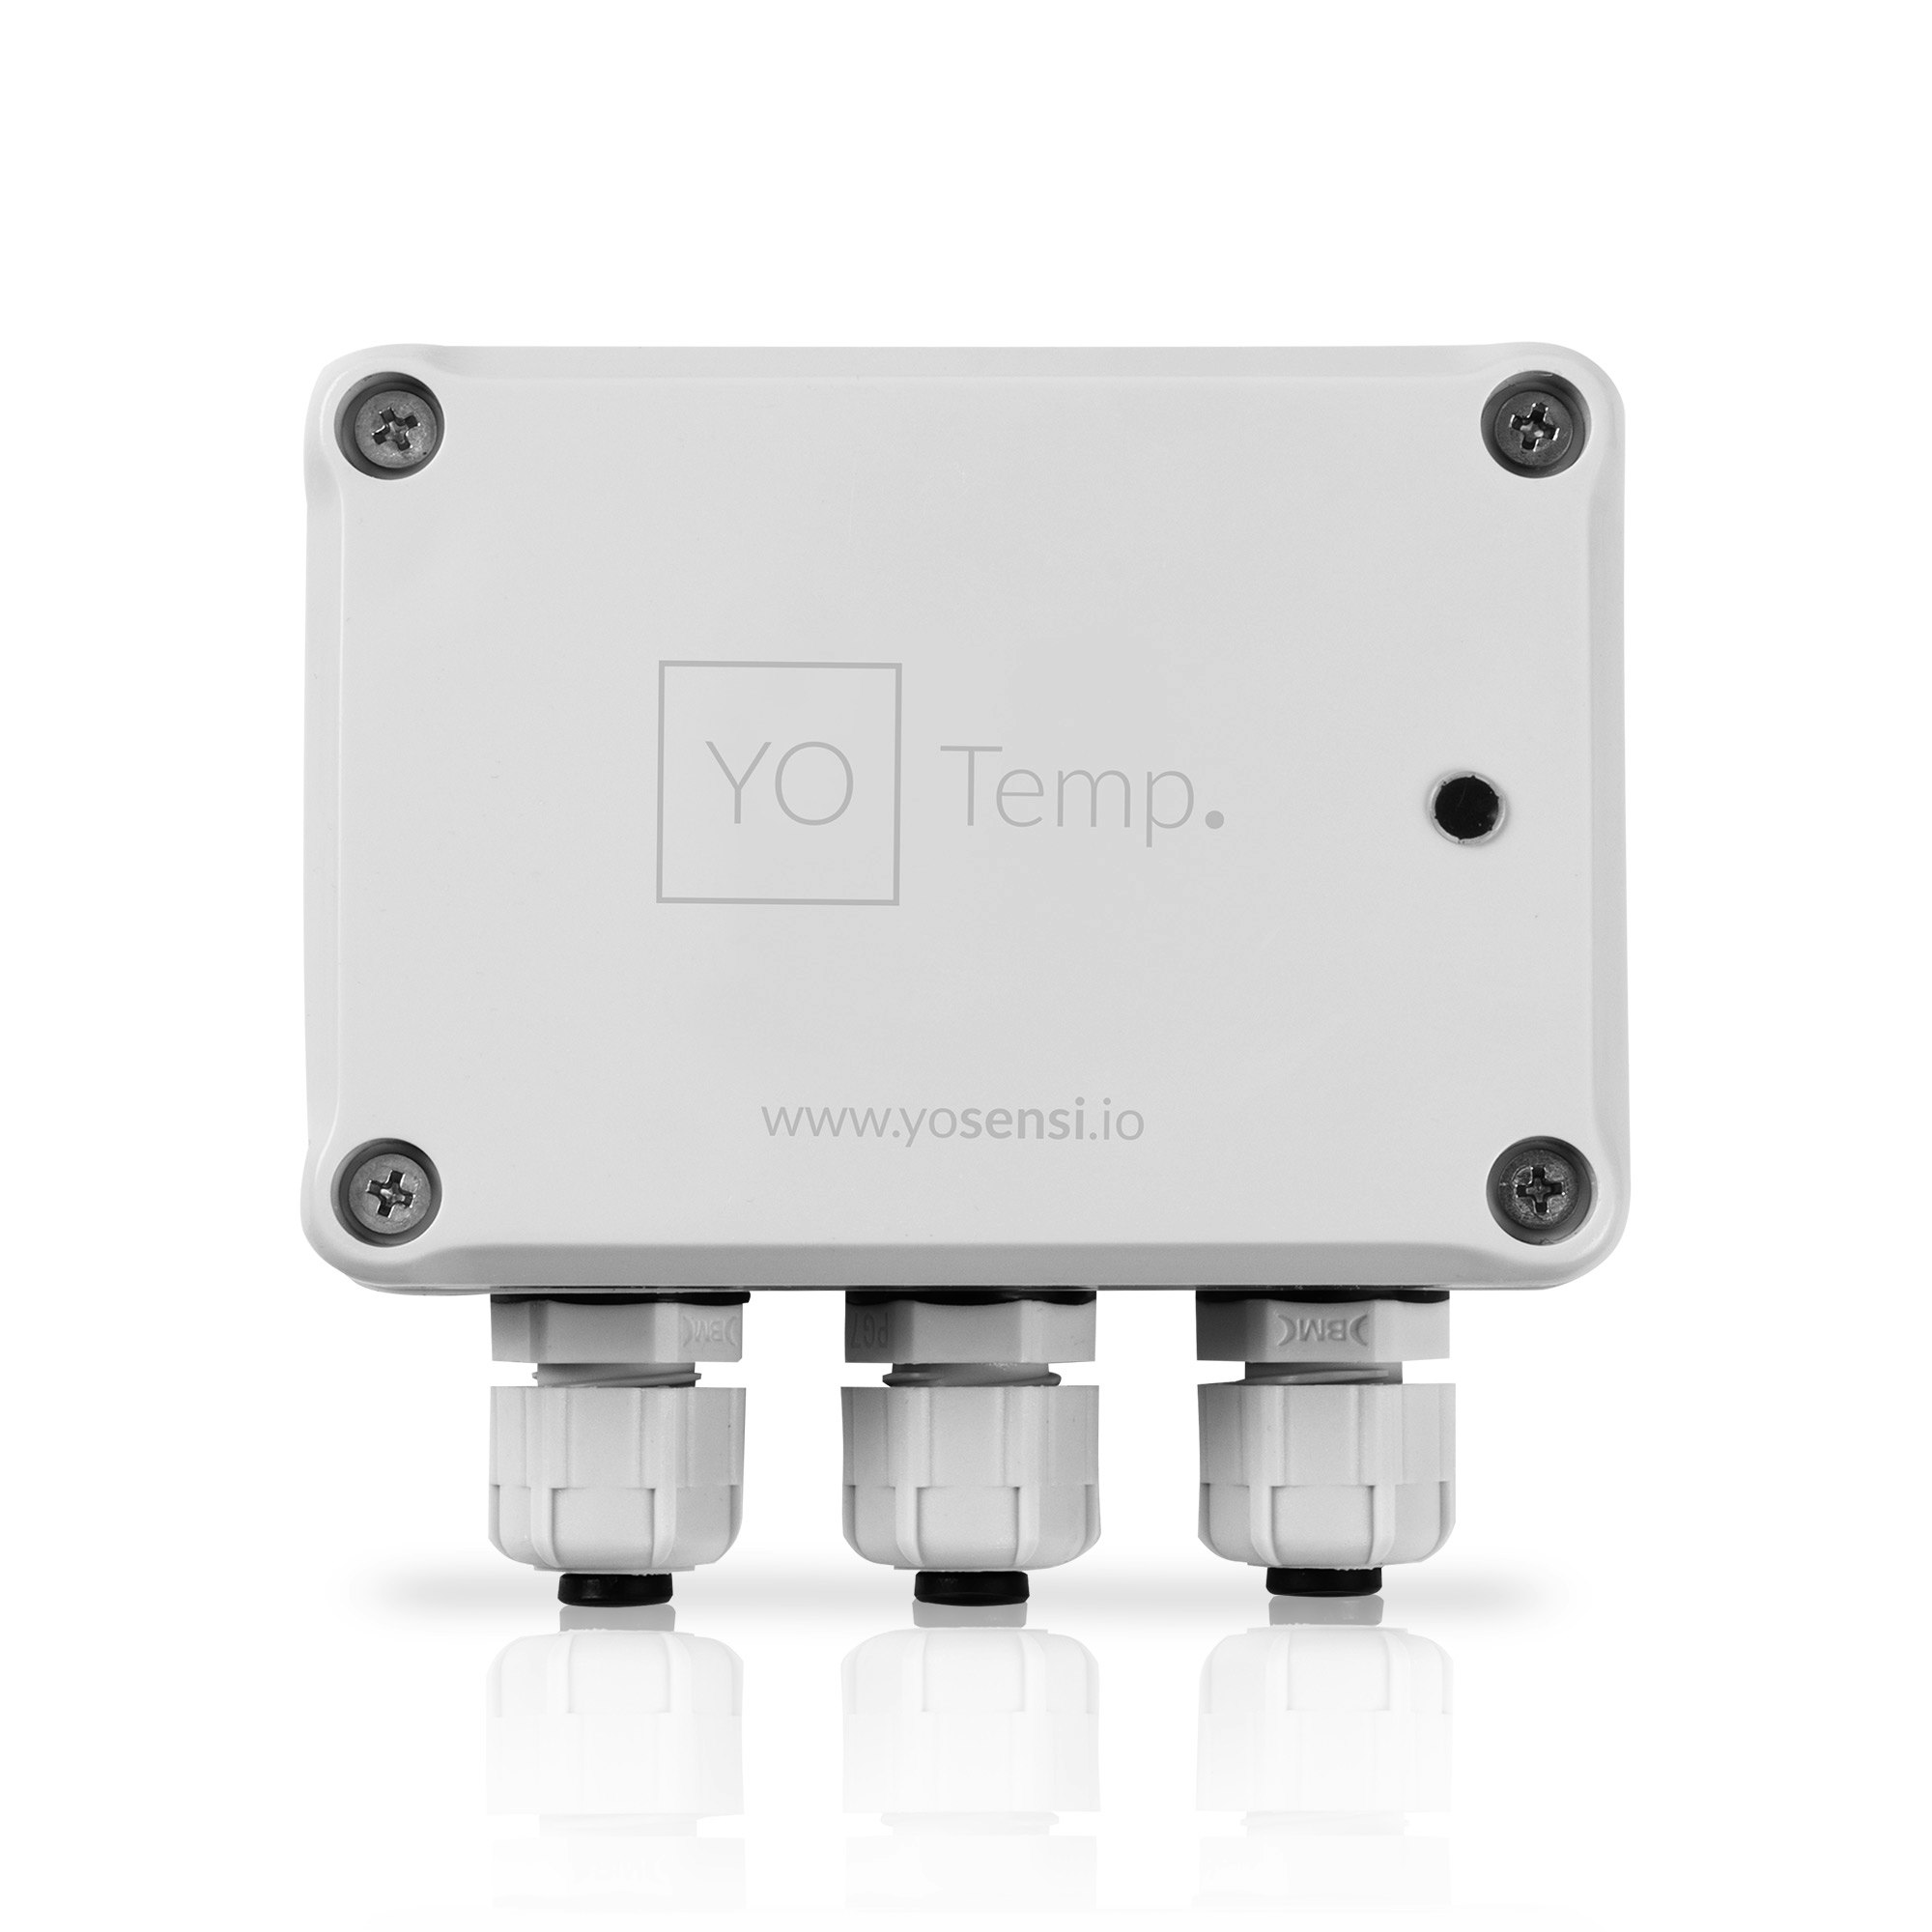 YO Temp measures the temperature at up to three external locations.